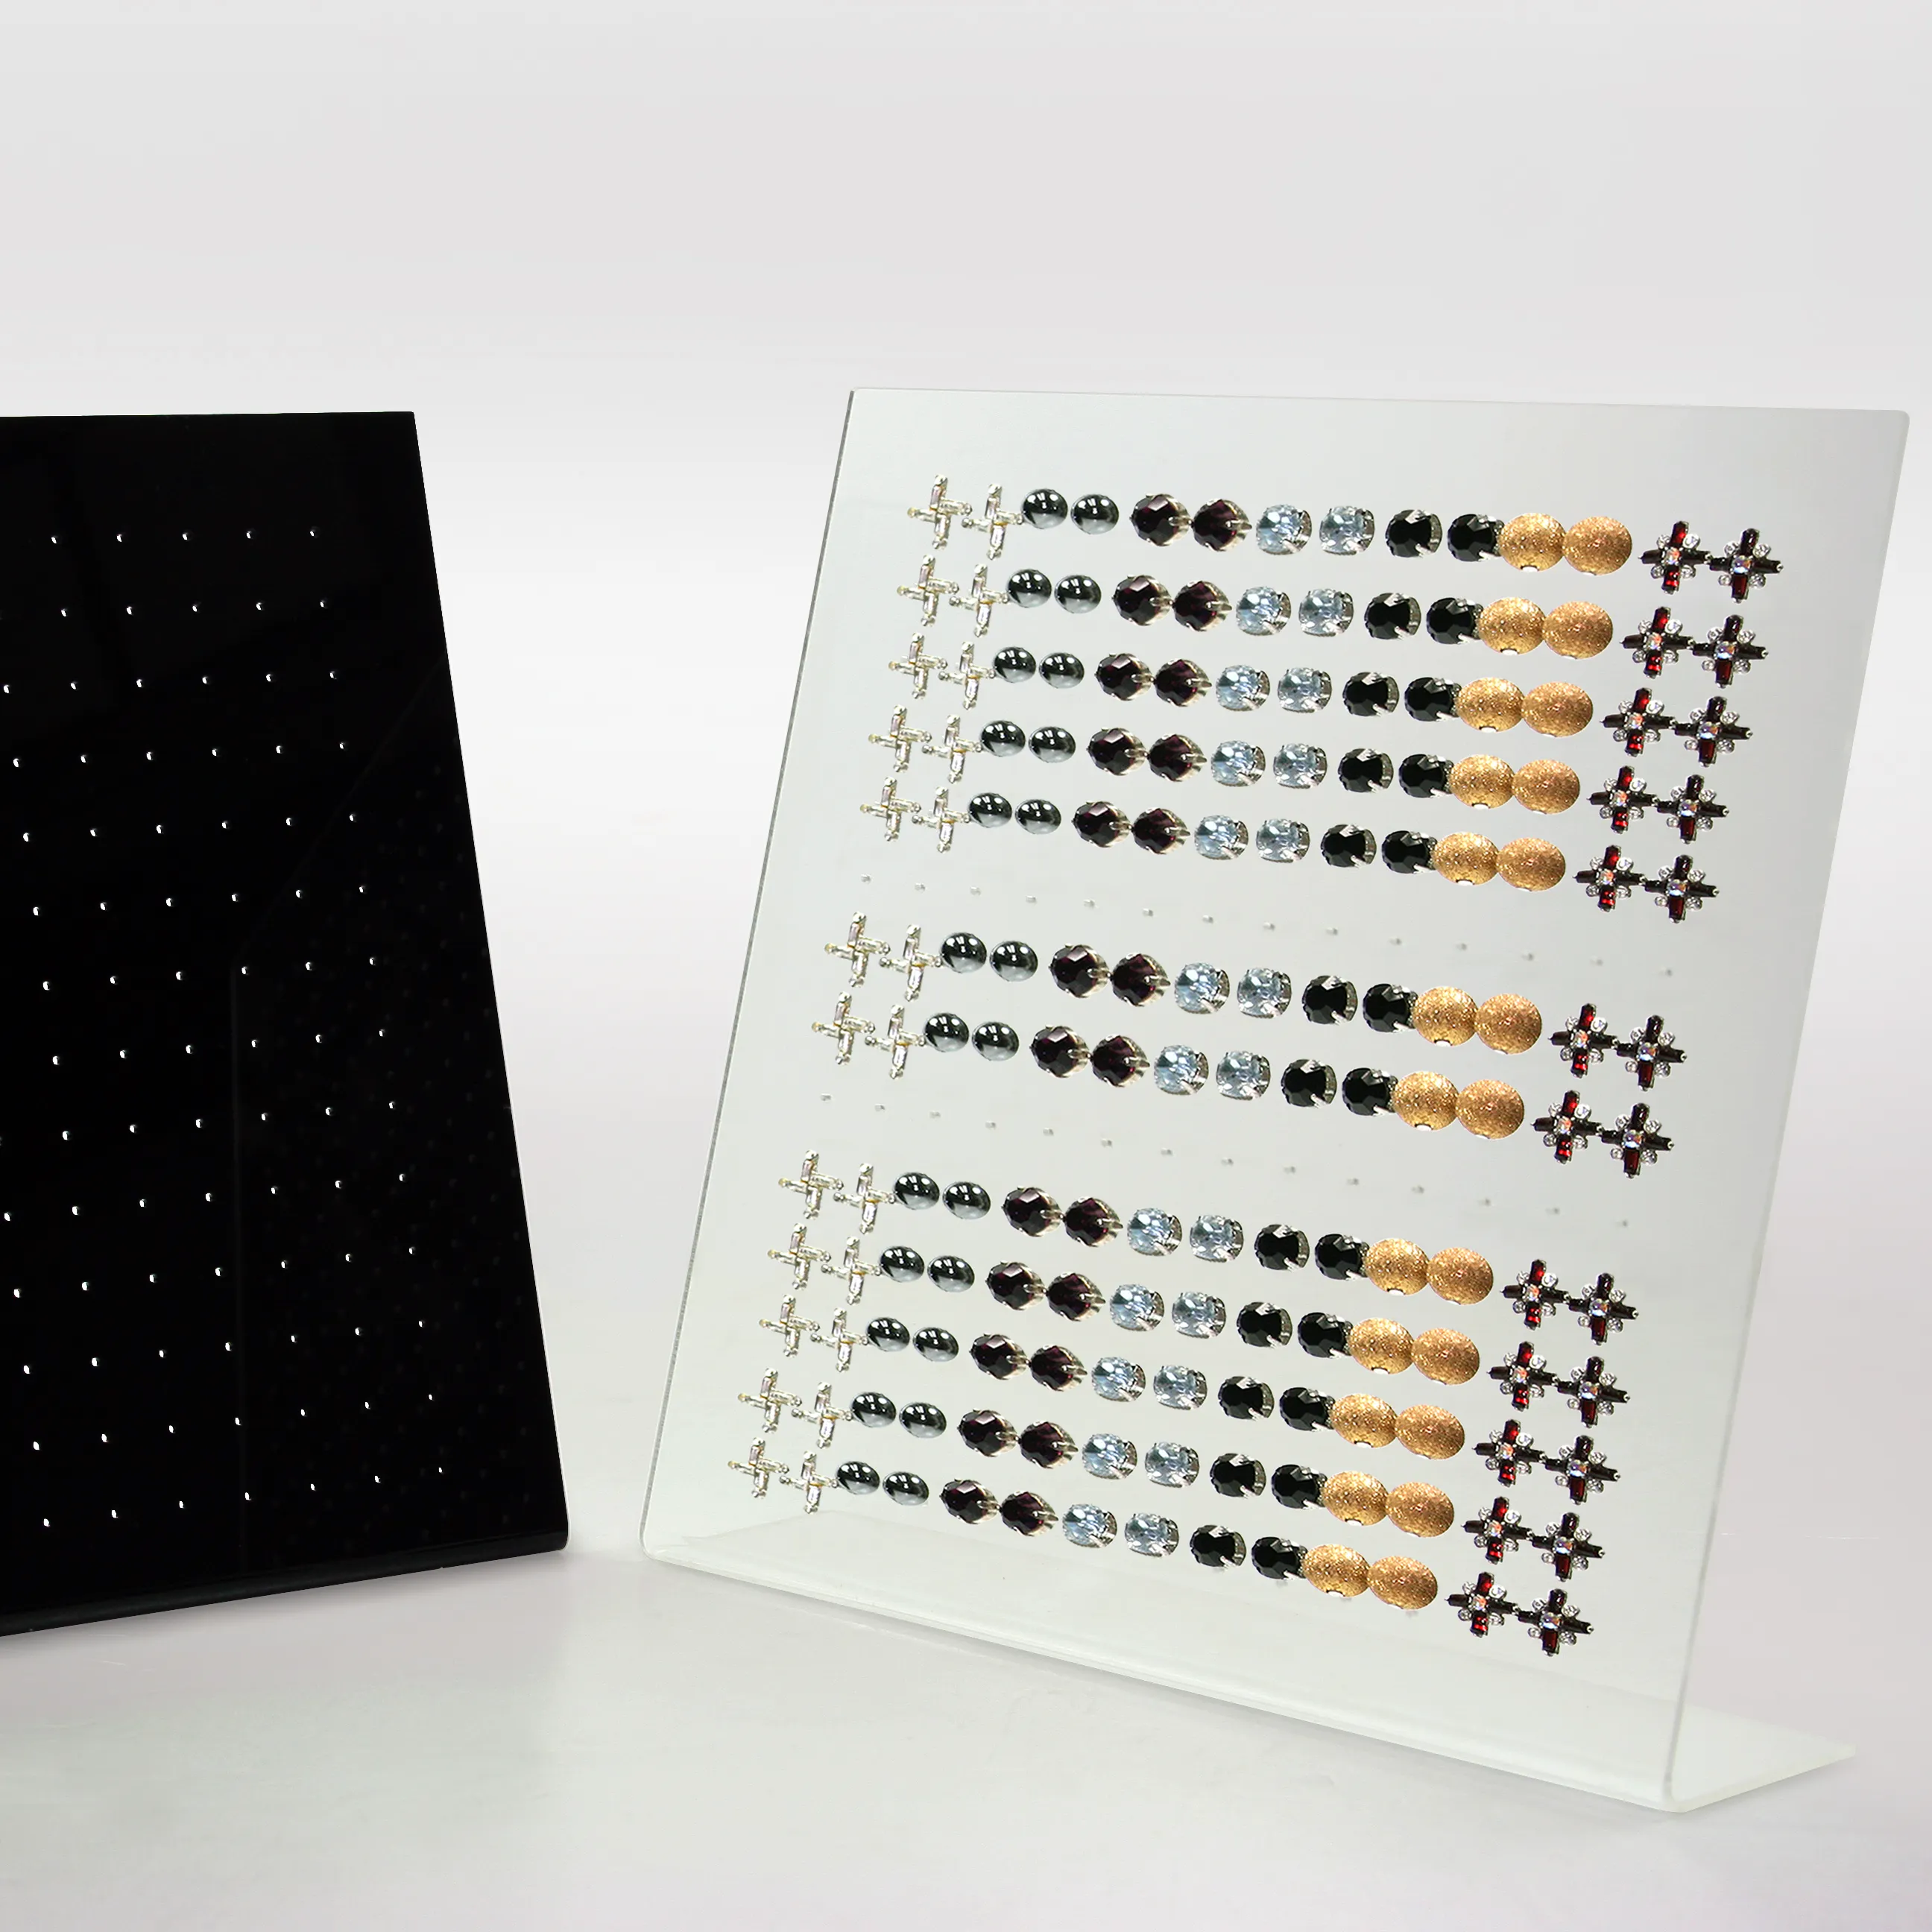 Clear & black Acrylic Studs Earring Jewelry Display Stand showcase each holds 49 pairs